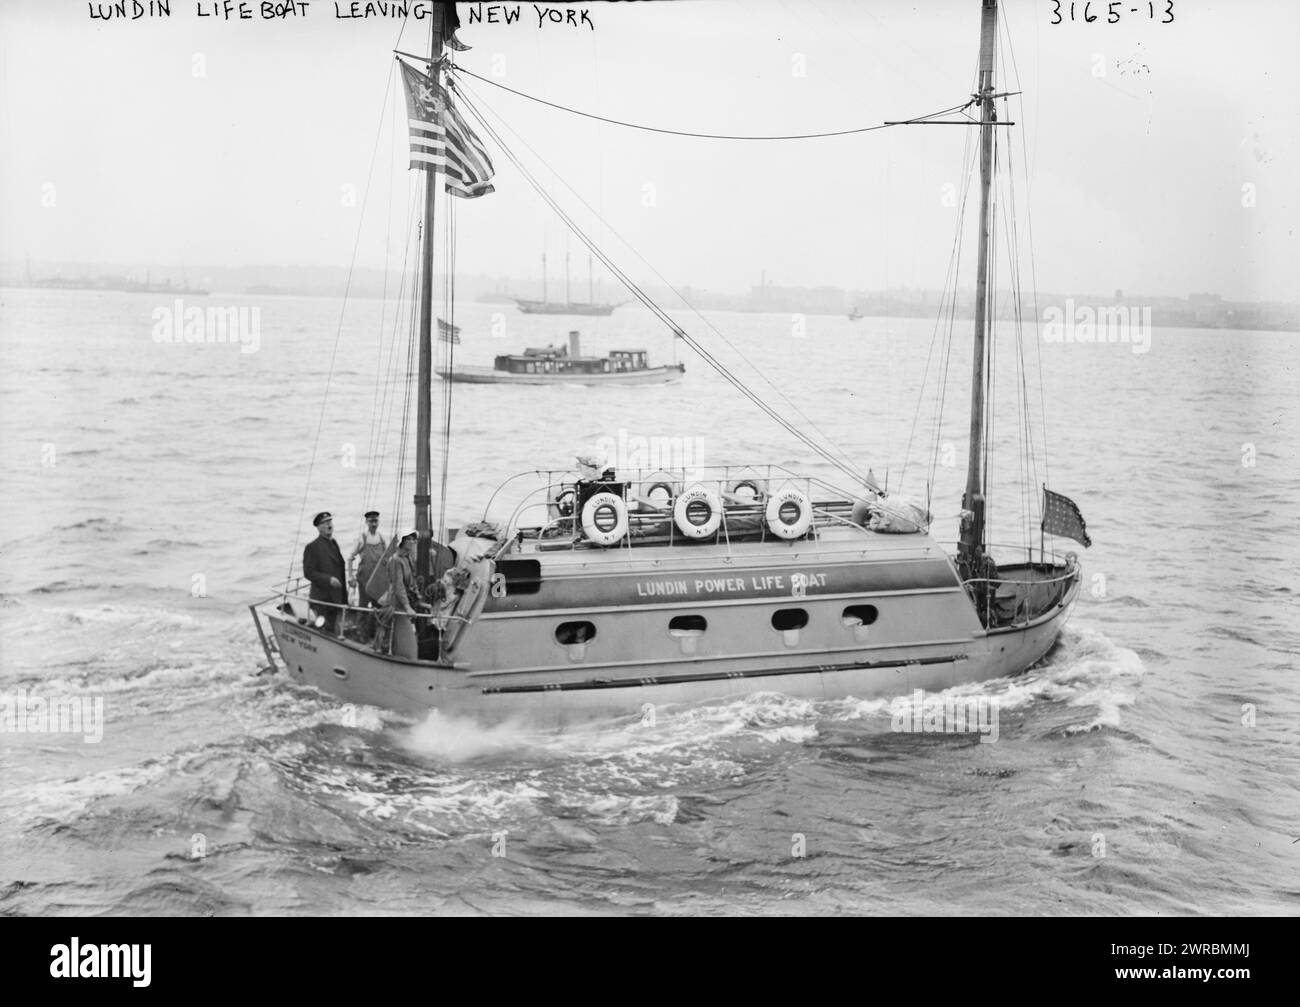 Lundin lifeboat leaving N.Y., Photograph shows the Lundin Power Lifeboat with newlyweds Einar Sivard and Signe Holm Sivard and crew, leaving New York City for a trip to cross the Atlantic. Sivard was Superintendent of the Welin Manufacturing Co. which built the Lundin lifeboats., 1914 July, Glass negatives, 1 negative: glass Stock Photo